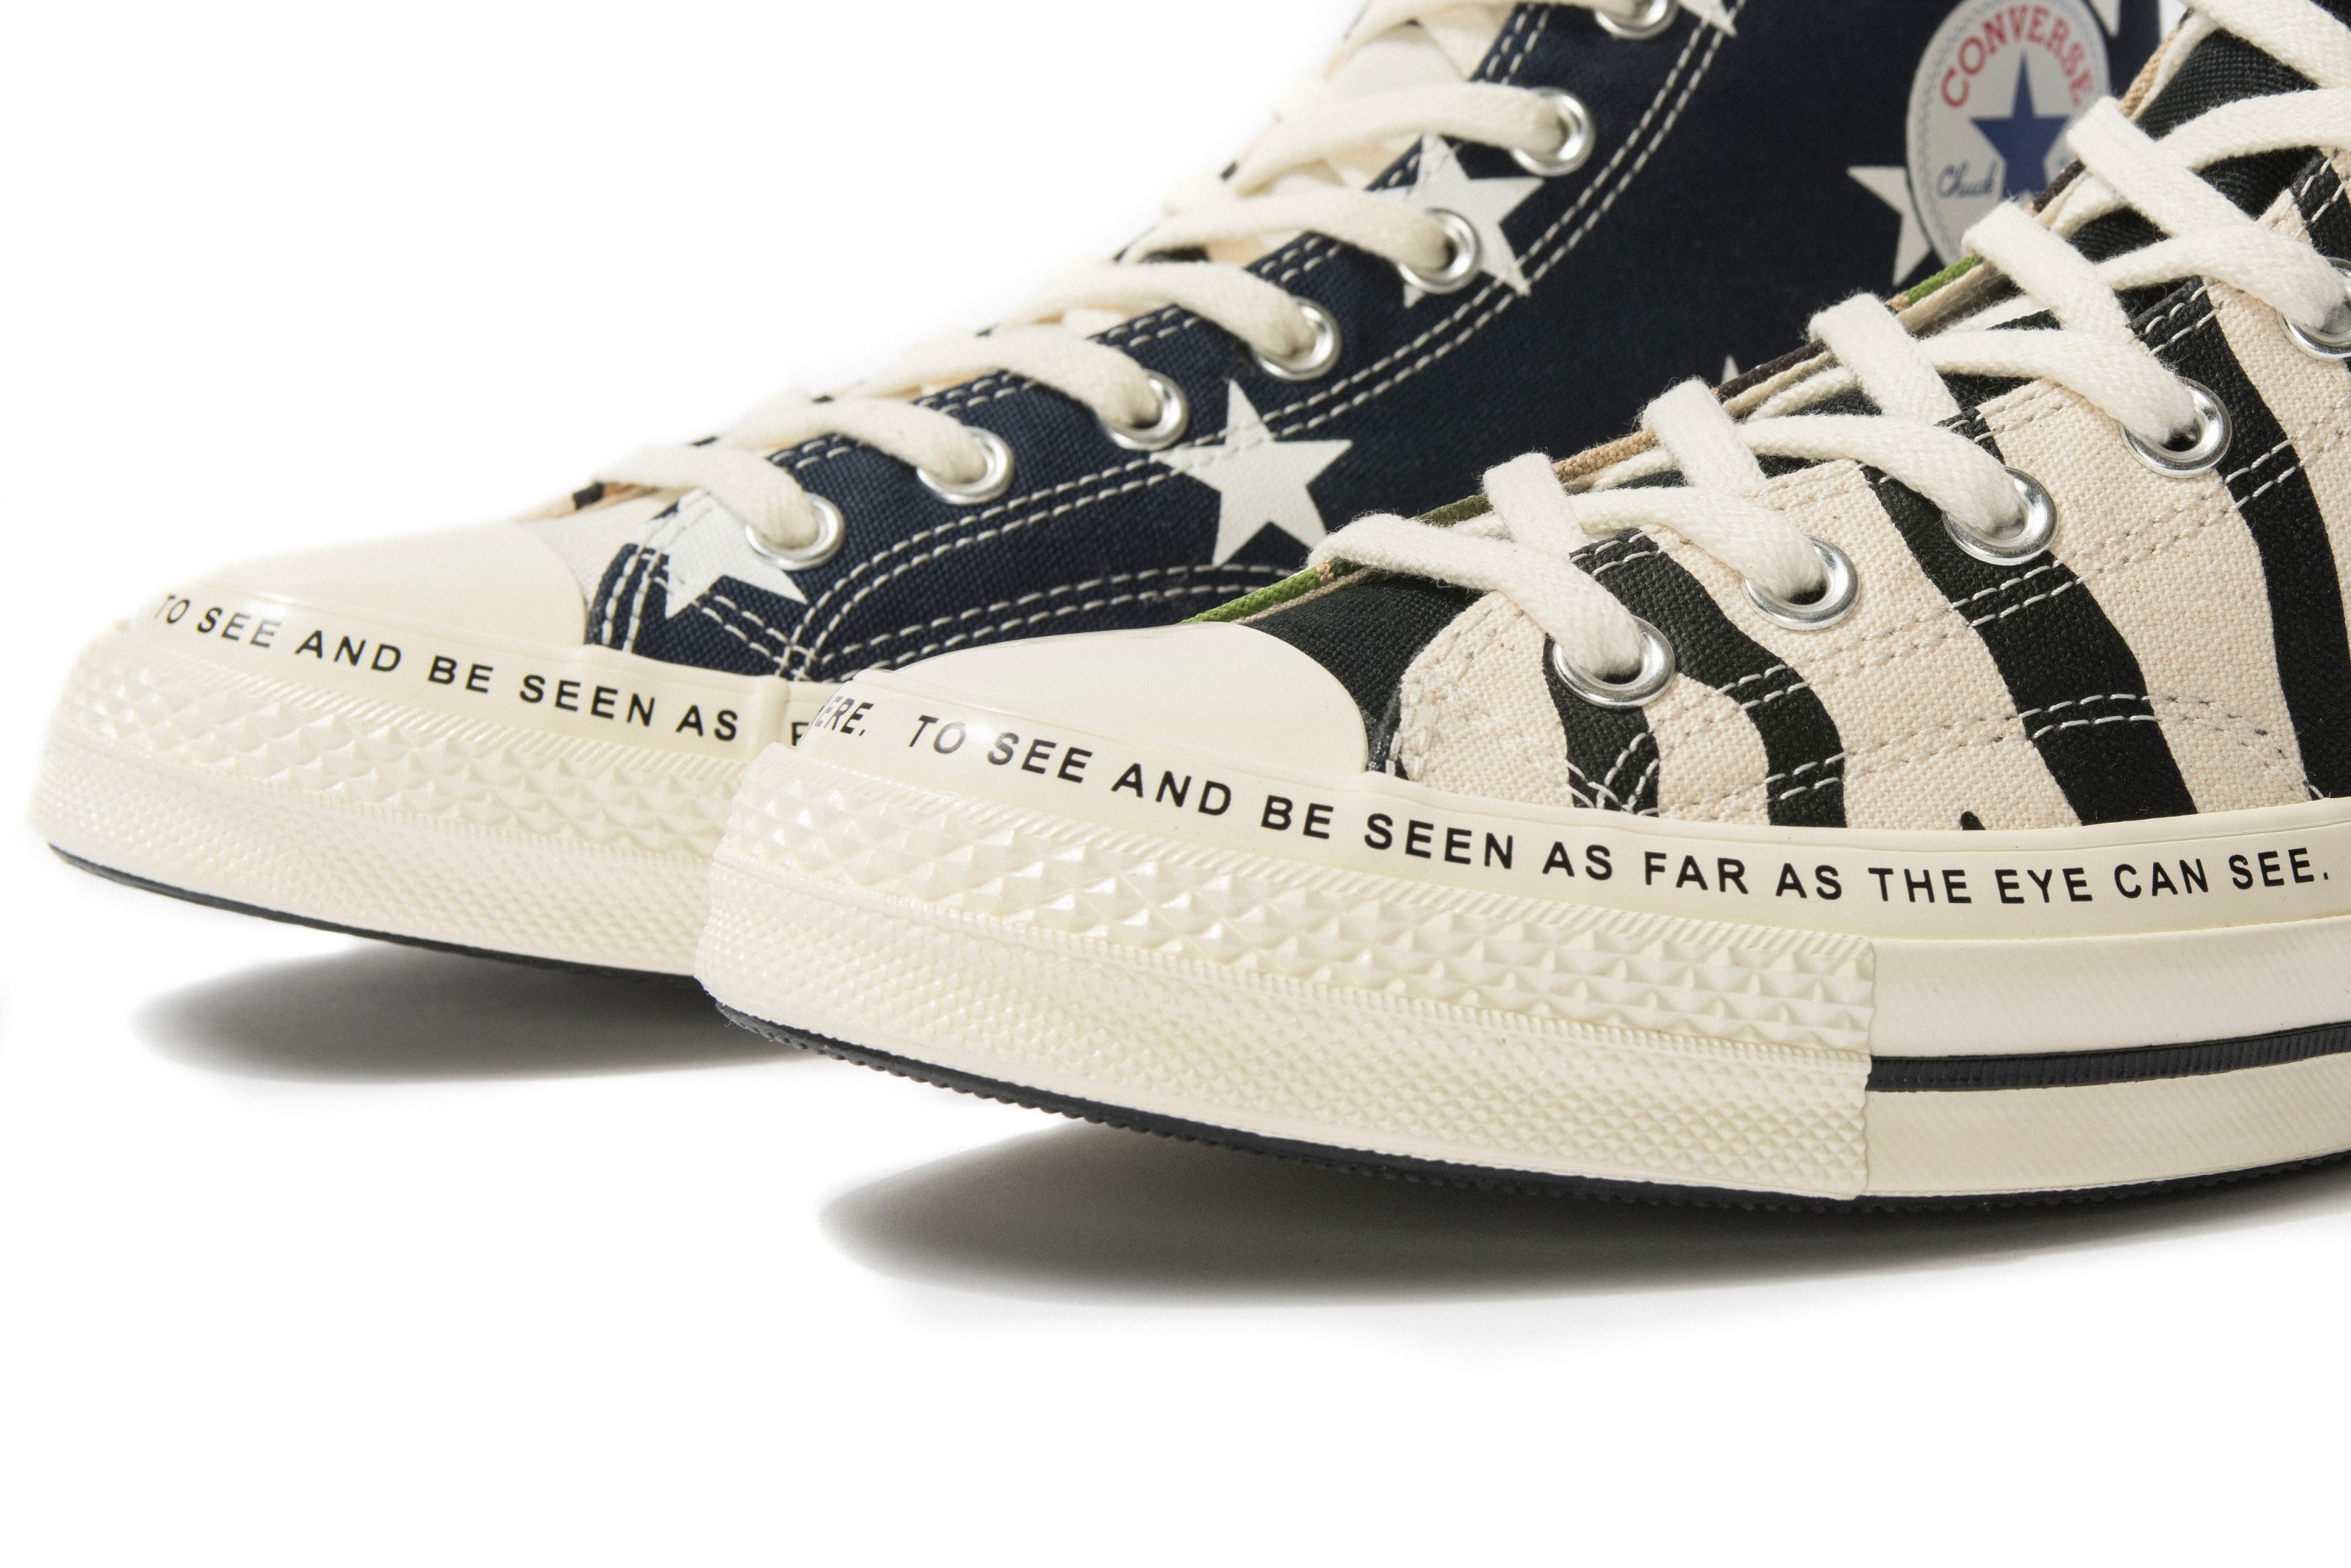 Brain Dead x Converse Collaboration Goes For A Wild Mismatch Look - MASSES